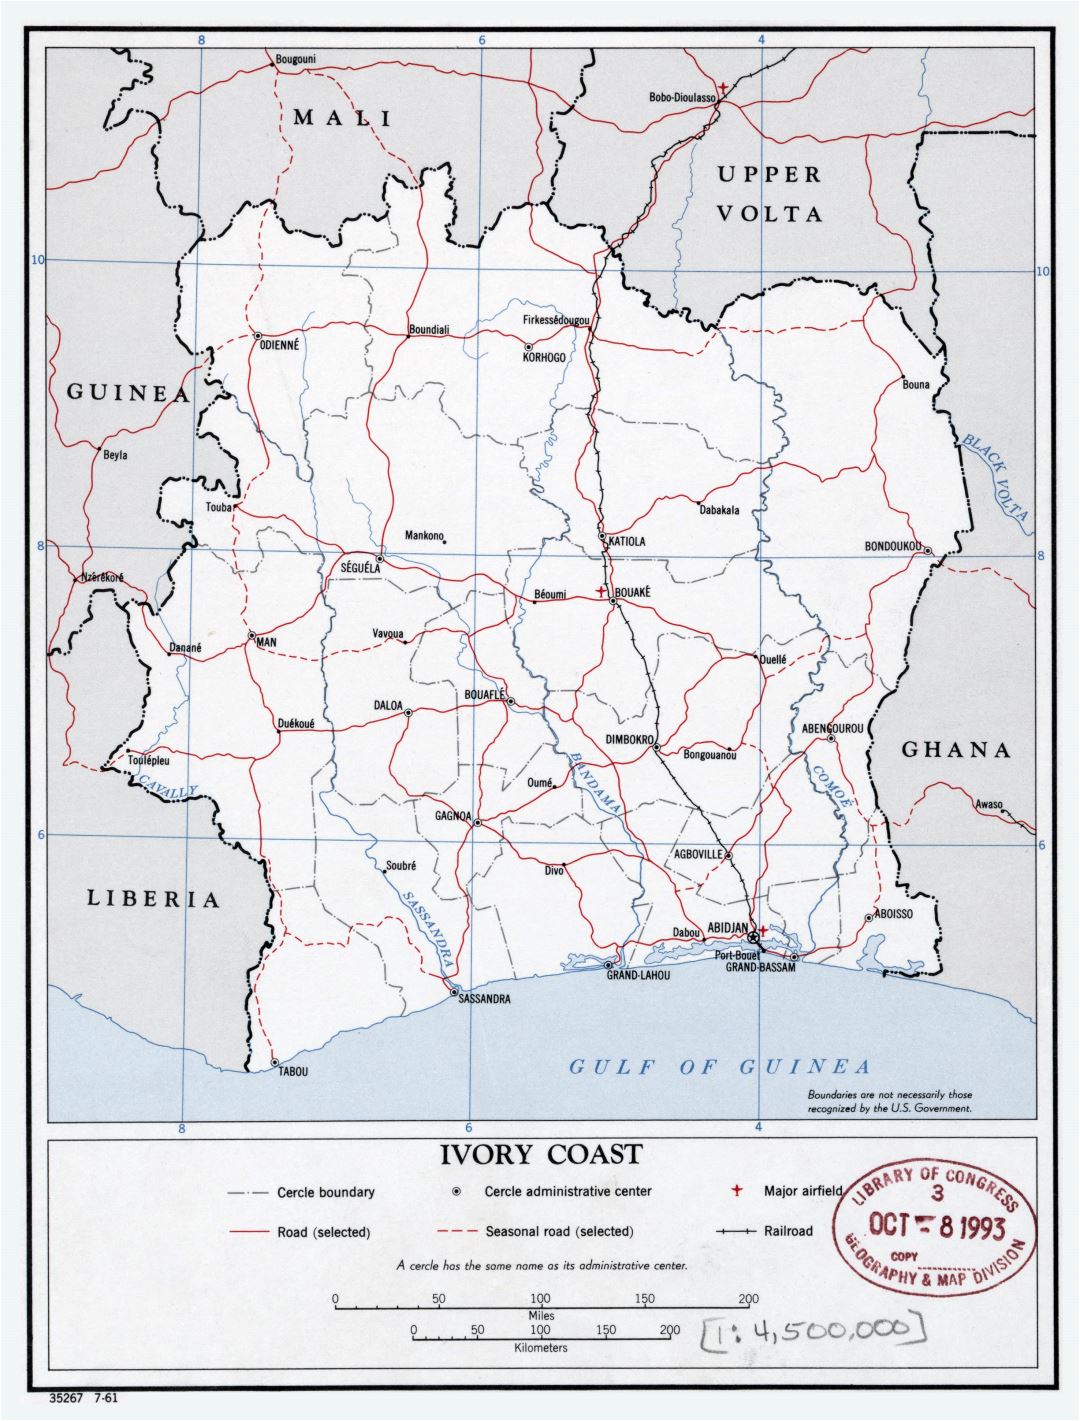 Large scale political and administrative map of Ivory Coast with roads, railroads, cities and airports - 1961